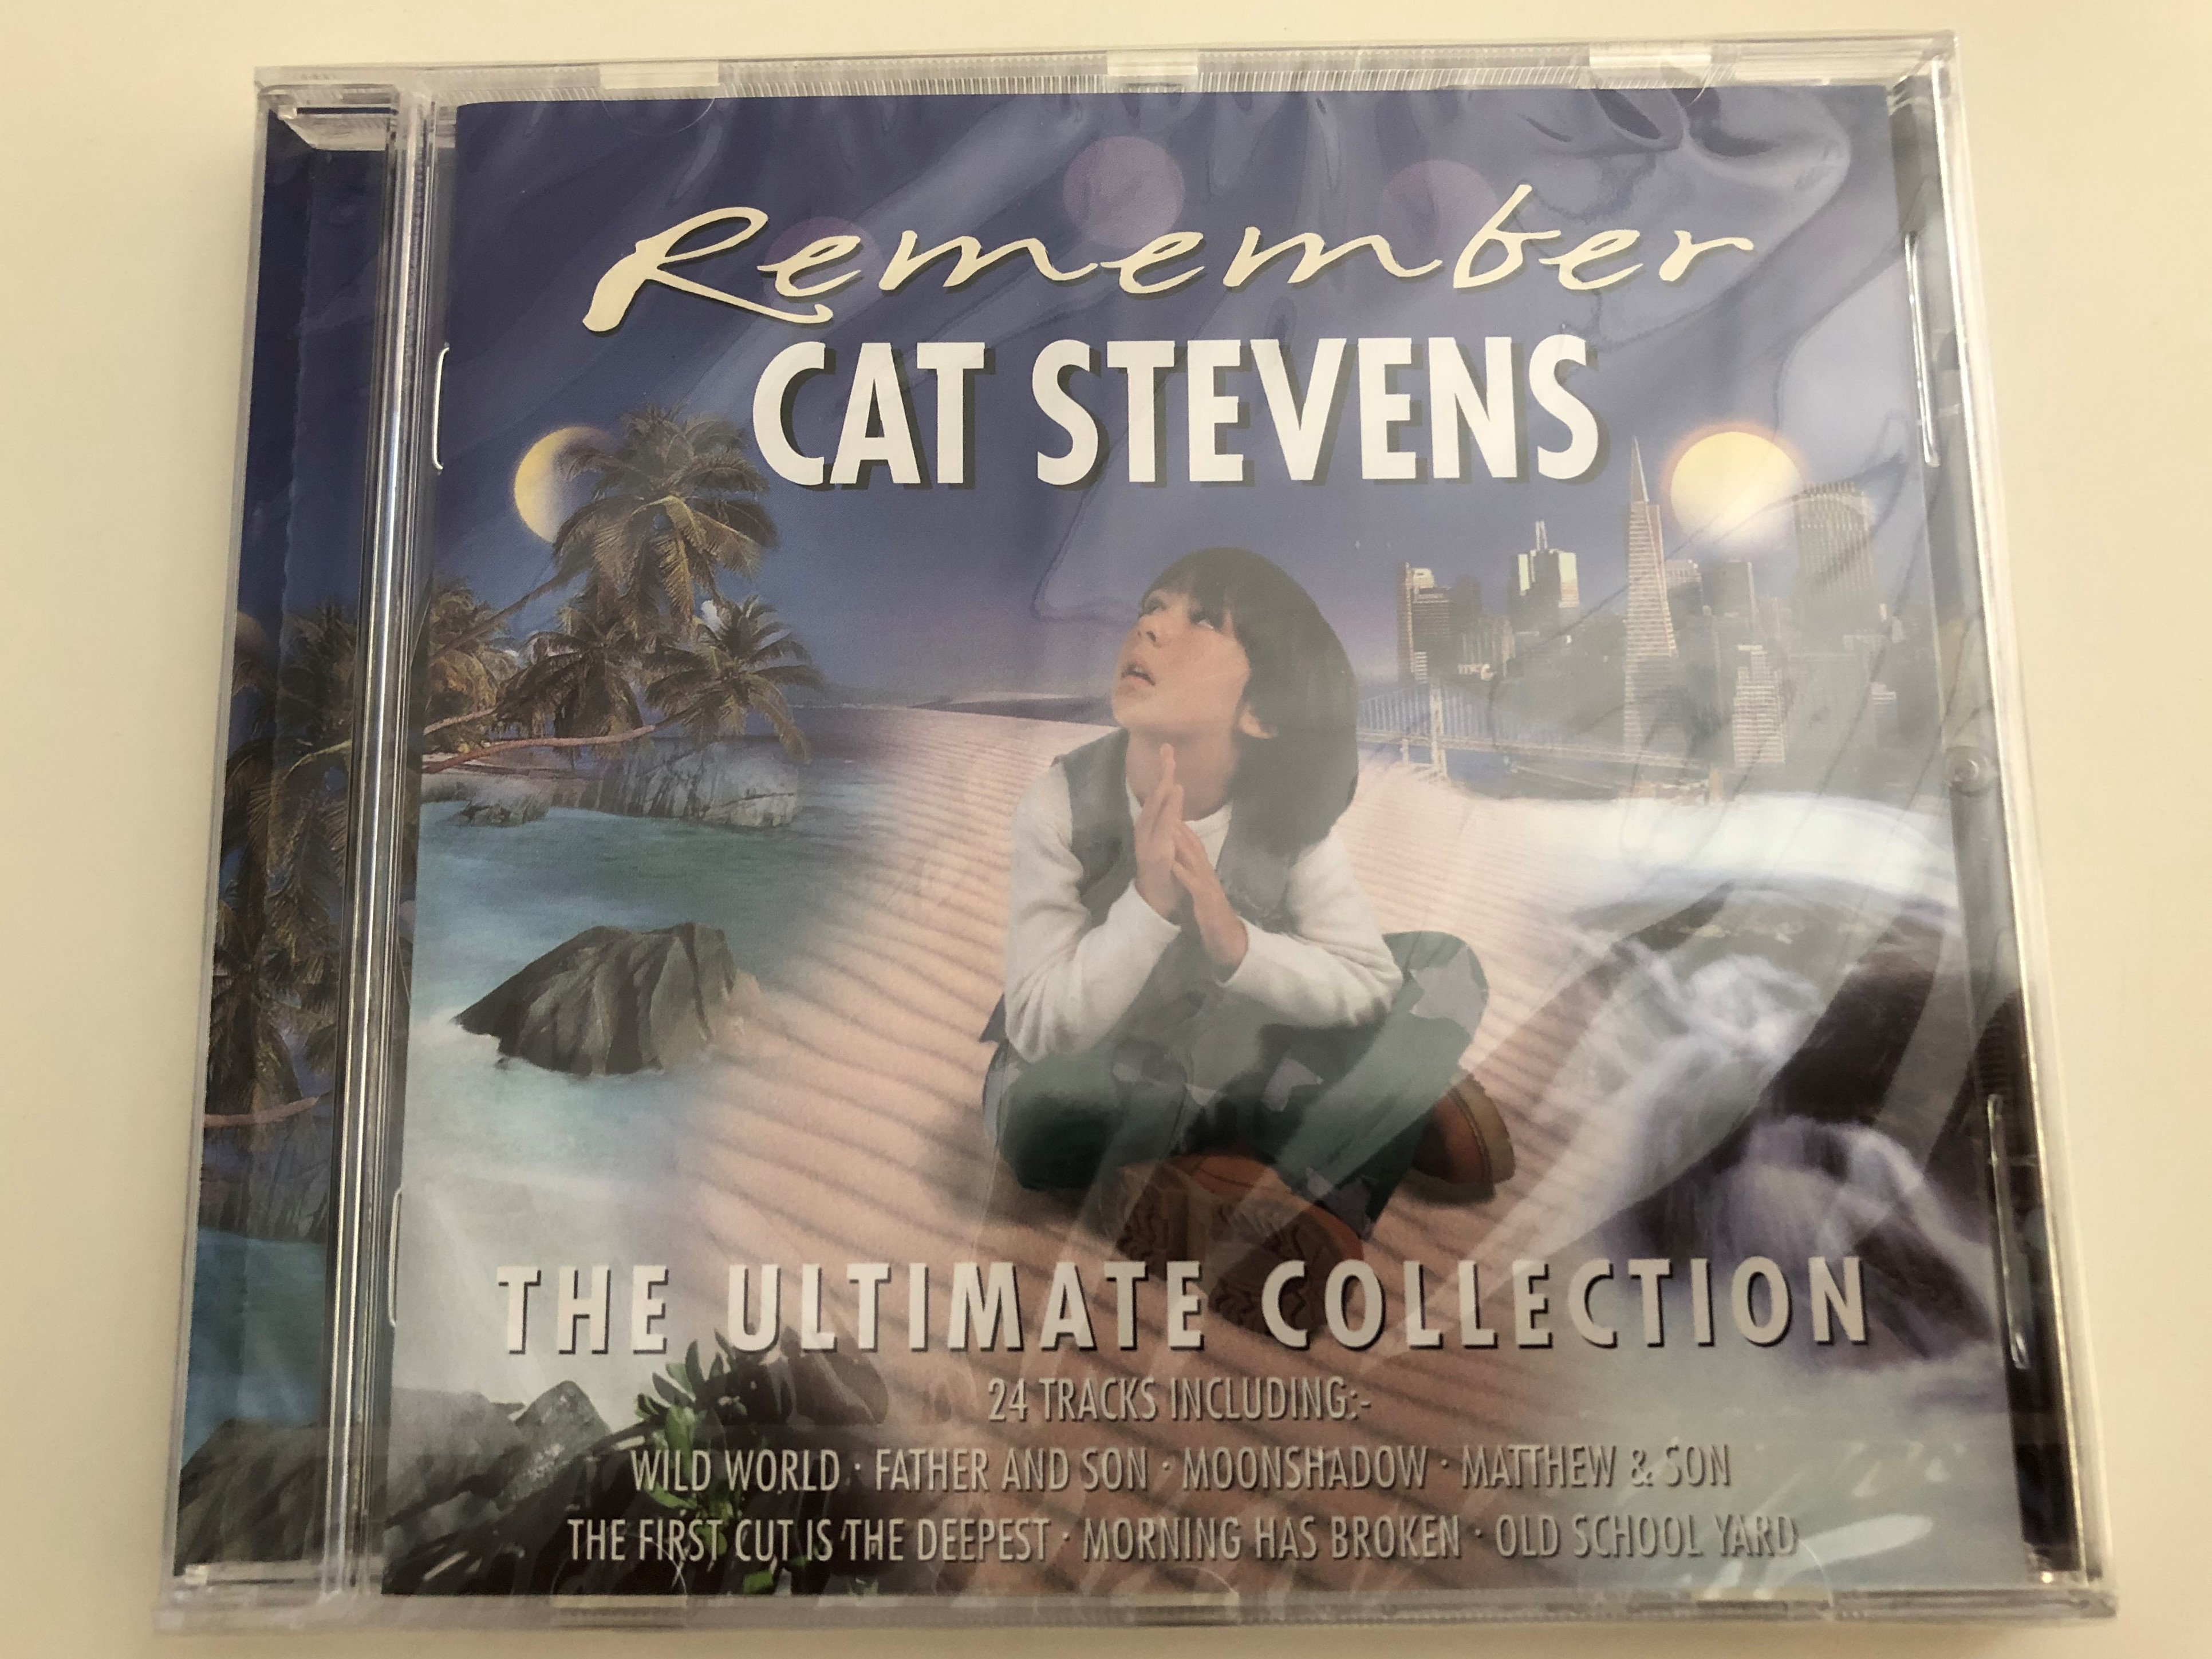 remember-cat-stevens-the-ultimate-collection-24-tracks-including-wild-world-father-and-son-moonshadow-matthew-son-the-first-cut-is-the-deepest-morning-has-broken-old-school-yard-is-1-.jpg